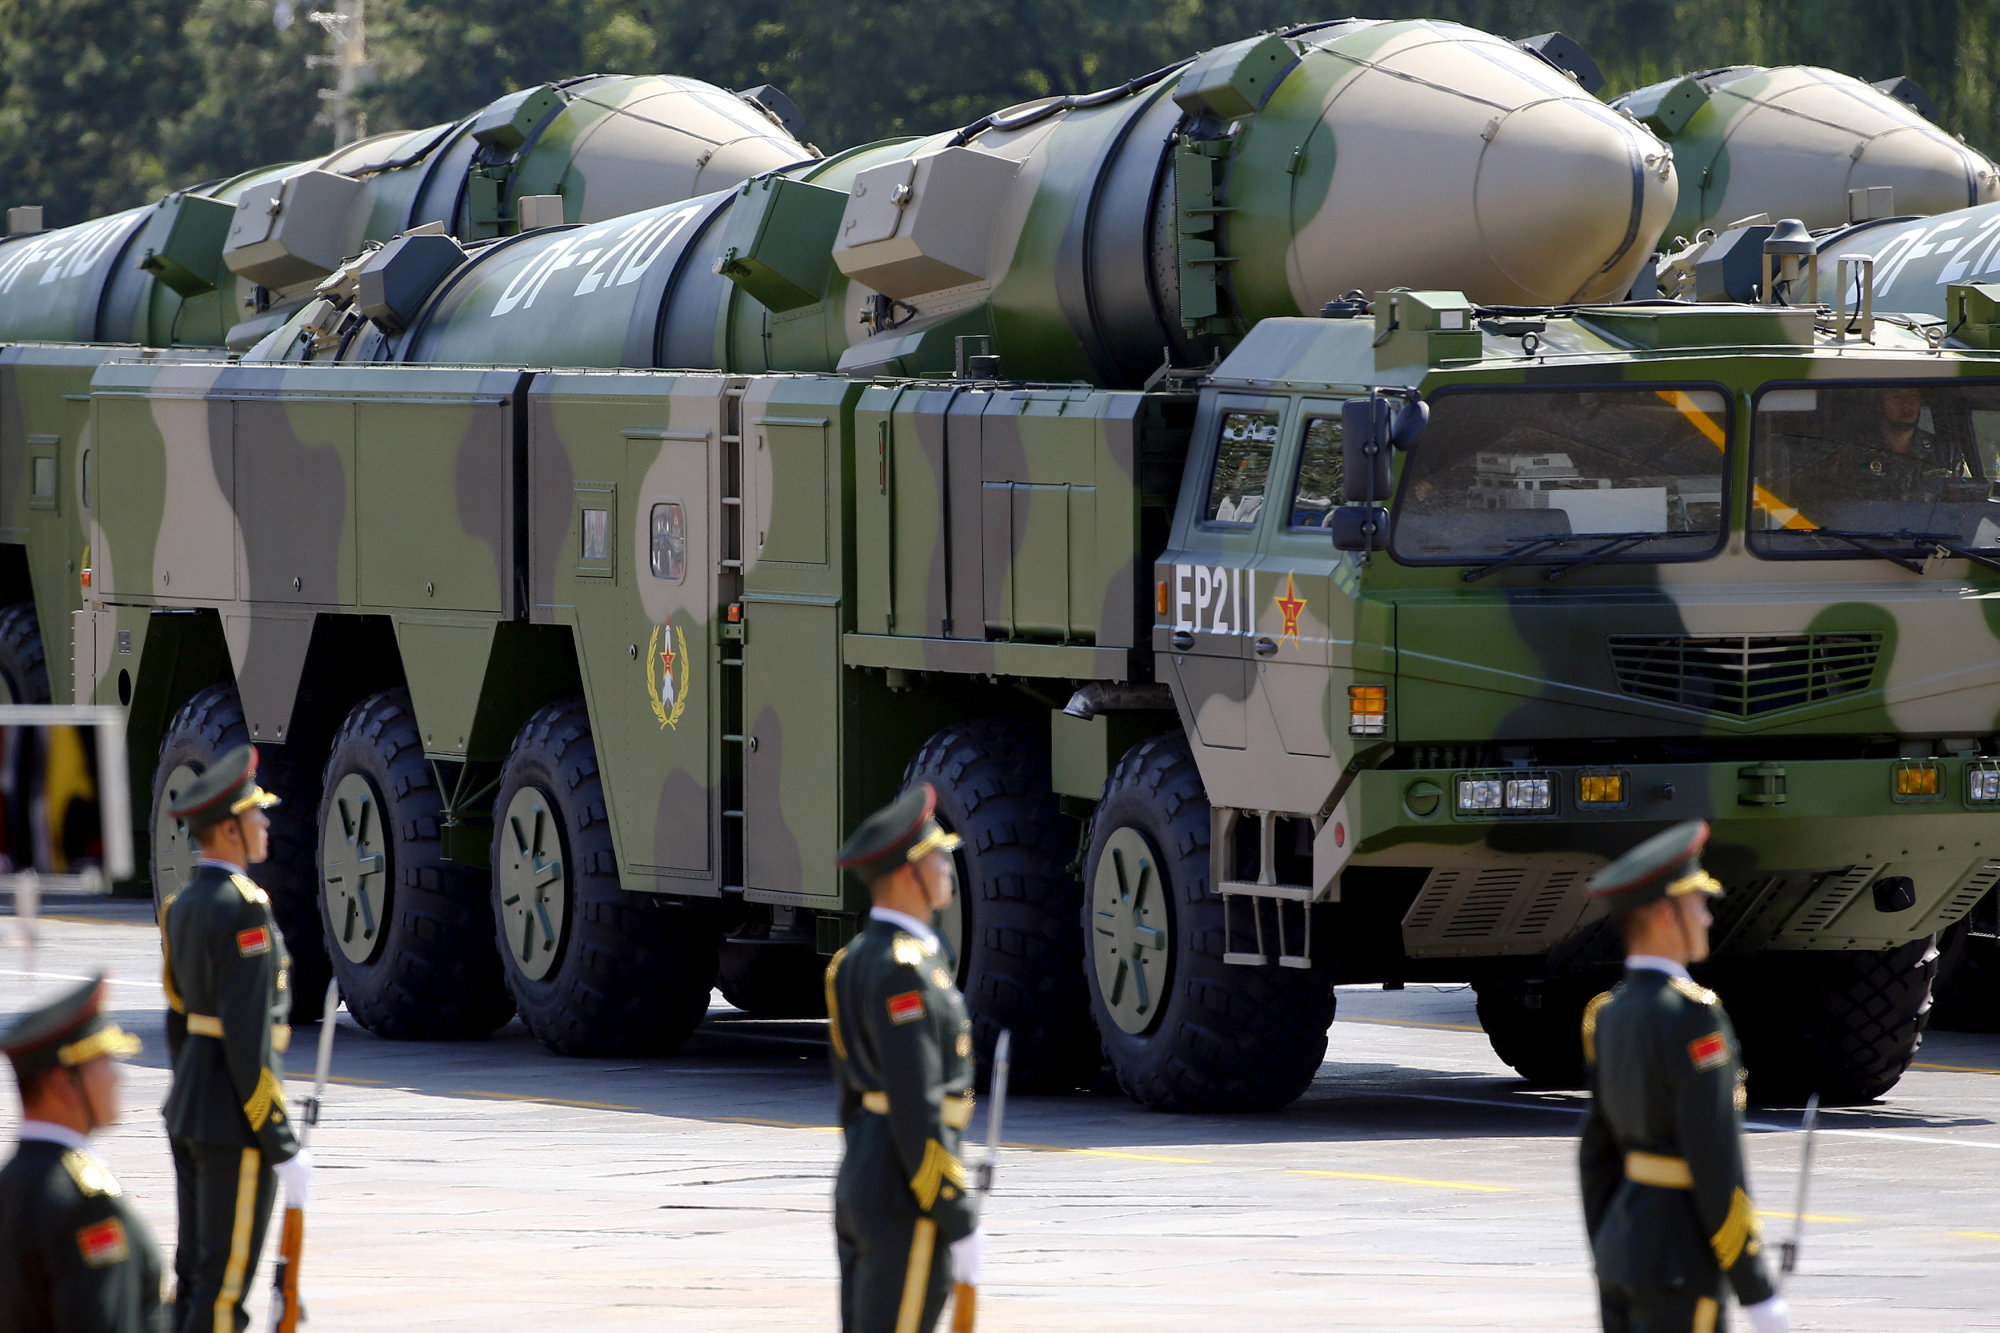 Military vehicles carrying DF-21D ballistic missiles take part in a military parade to mark the 70th anniversary of the end of World War II, in Beijing's Tiananmen Square on Sept. 3, 2015. | REUTERS